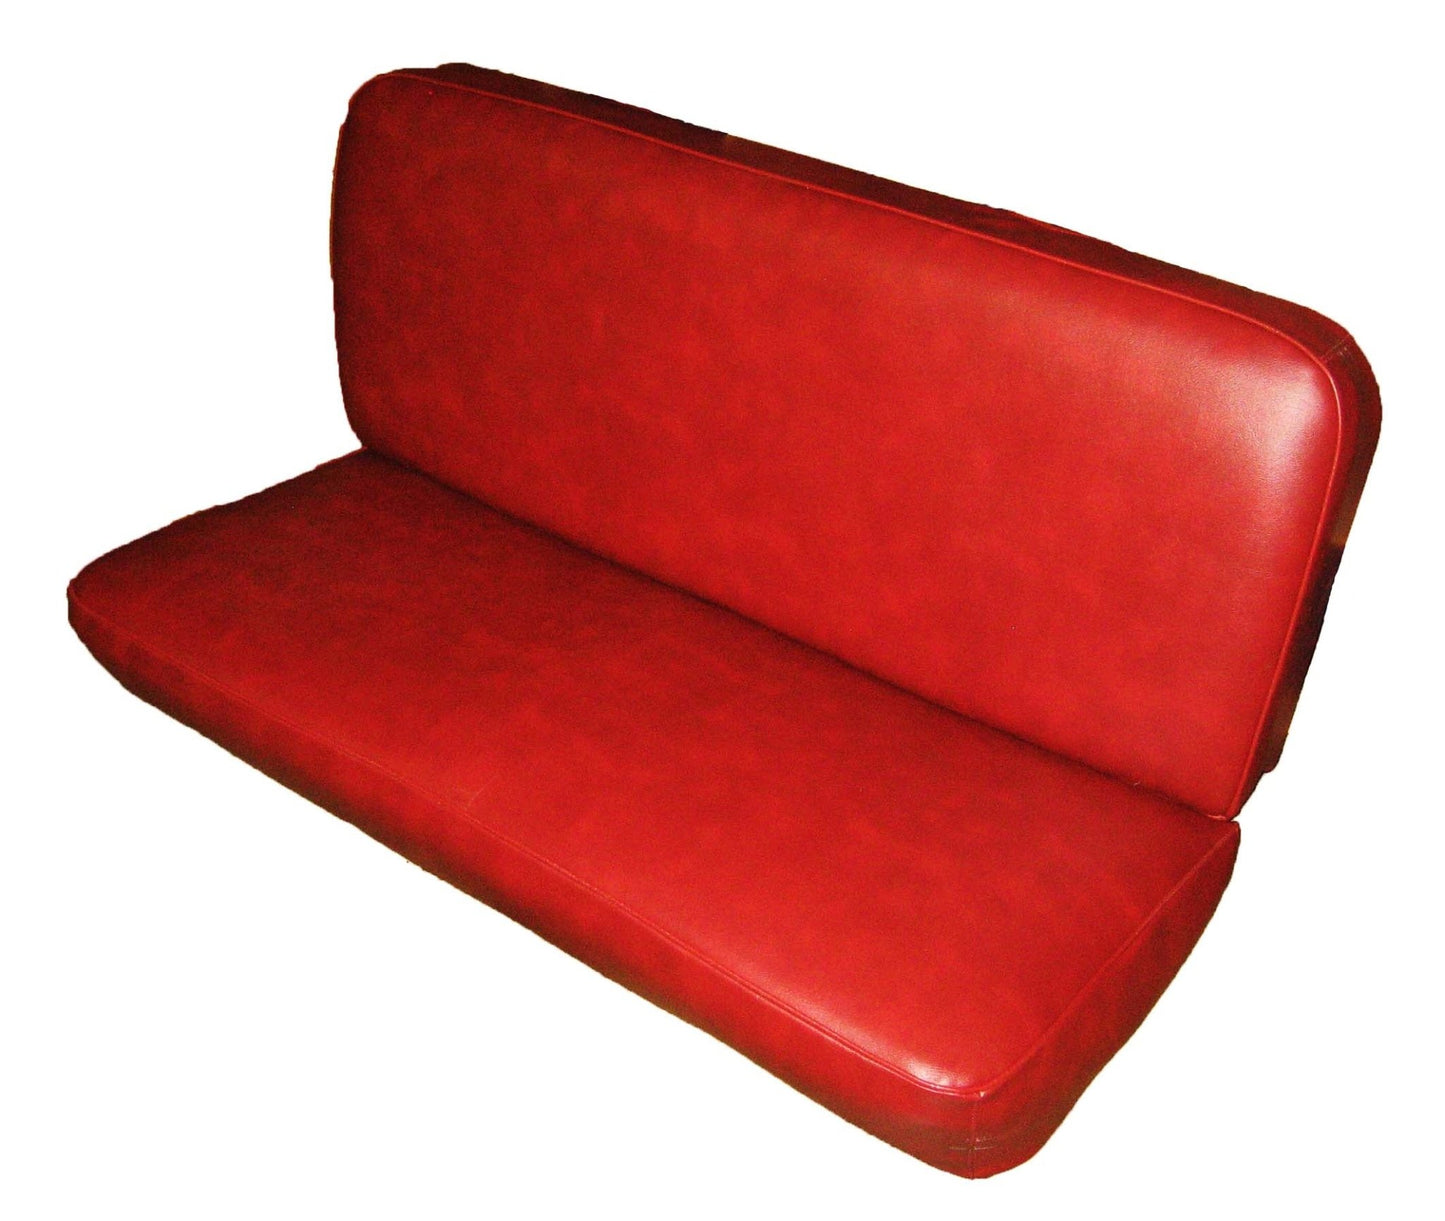 Seat Covers, Smooth Vinyl, All 4 Seats, 1946-1964, Willys Station Wagon - The JeepsterMan